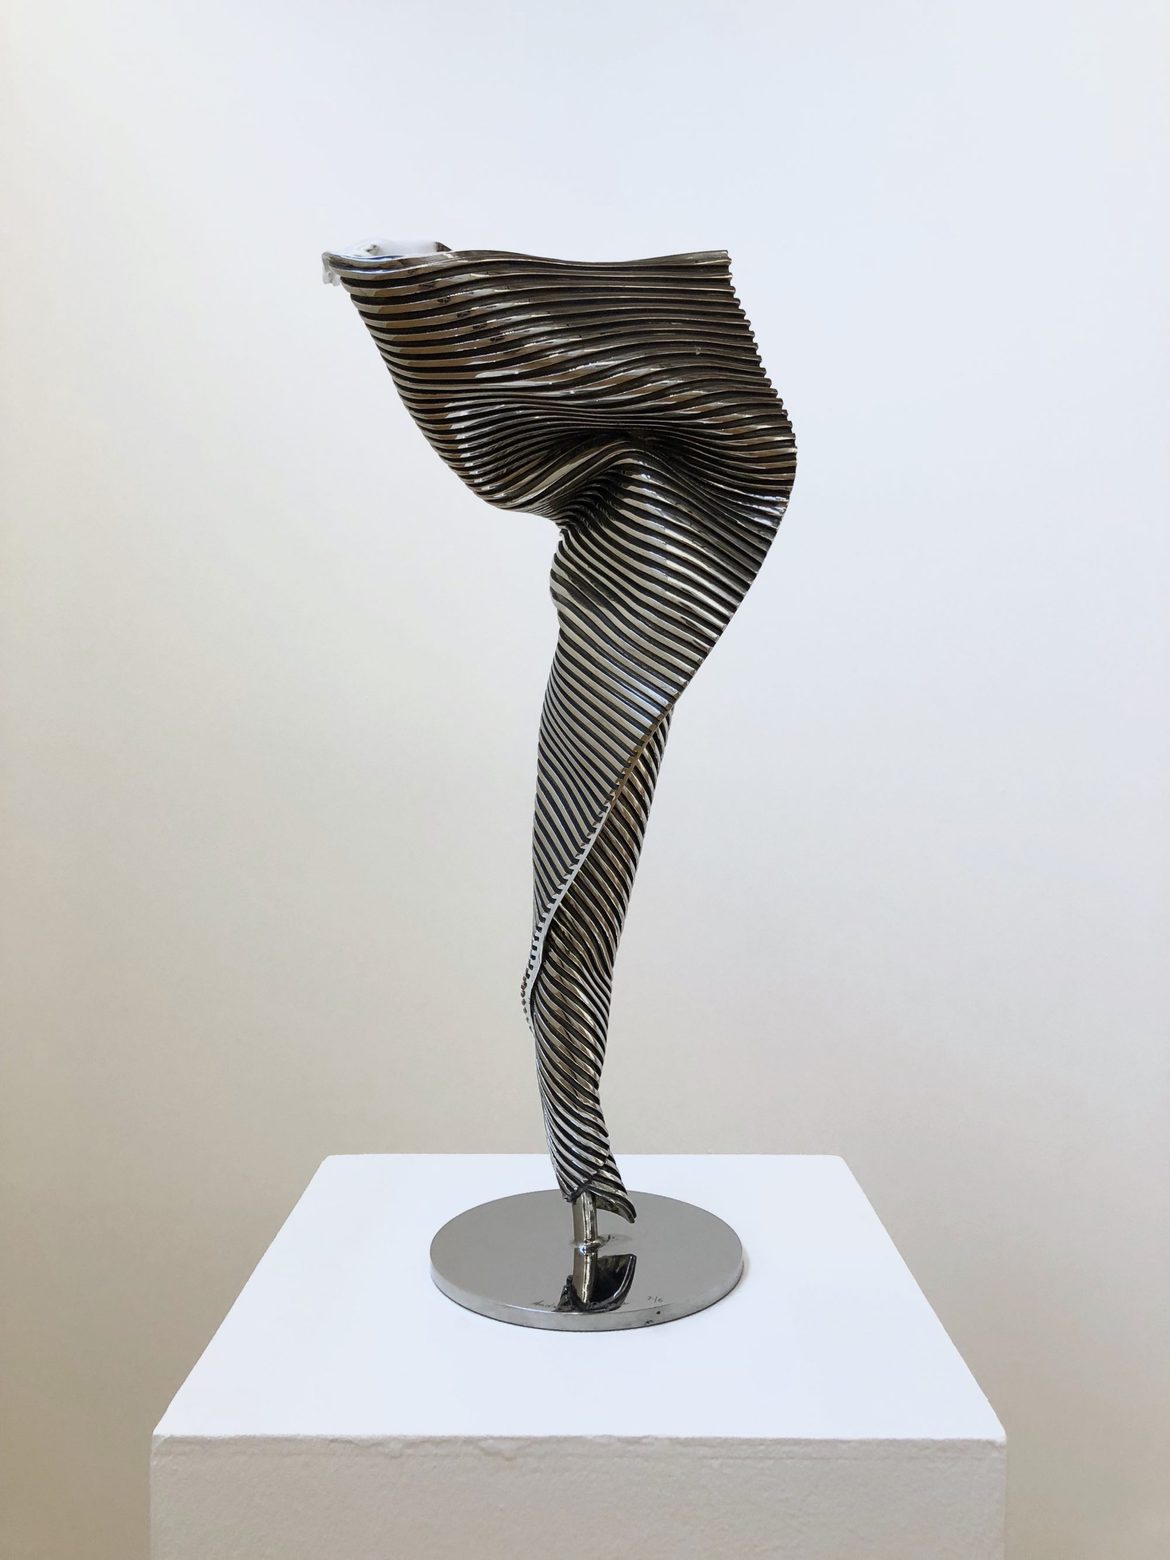 I Am', 2014, stainless steel, 65 x 31 x 25cm, edition of 5 + 1AP